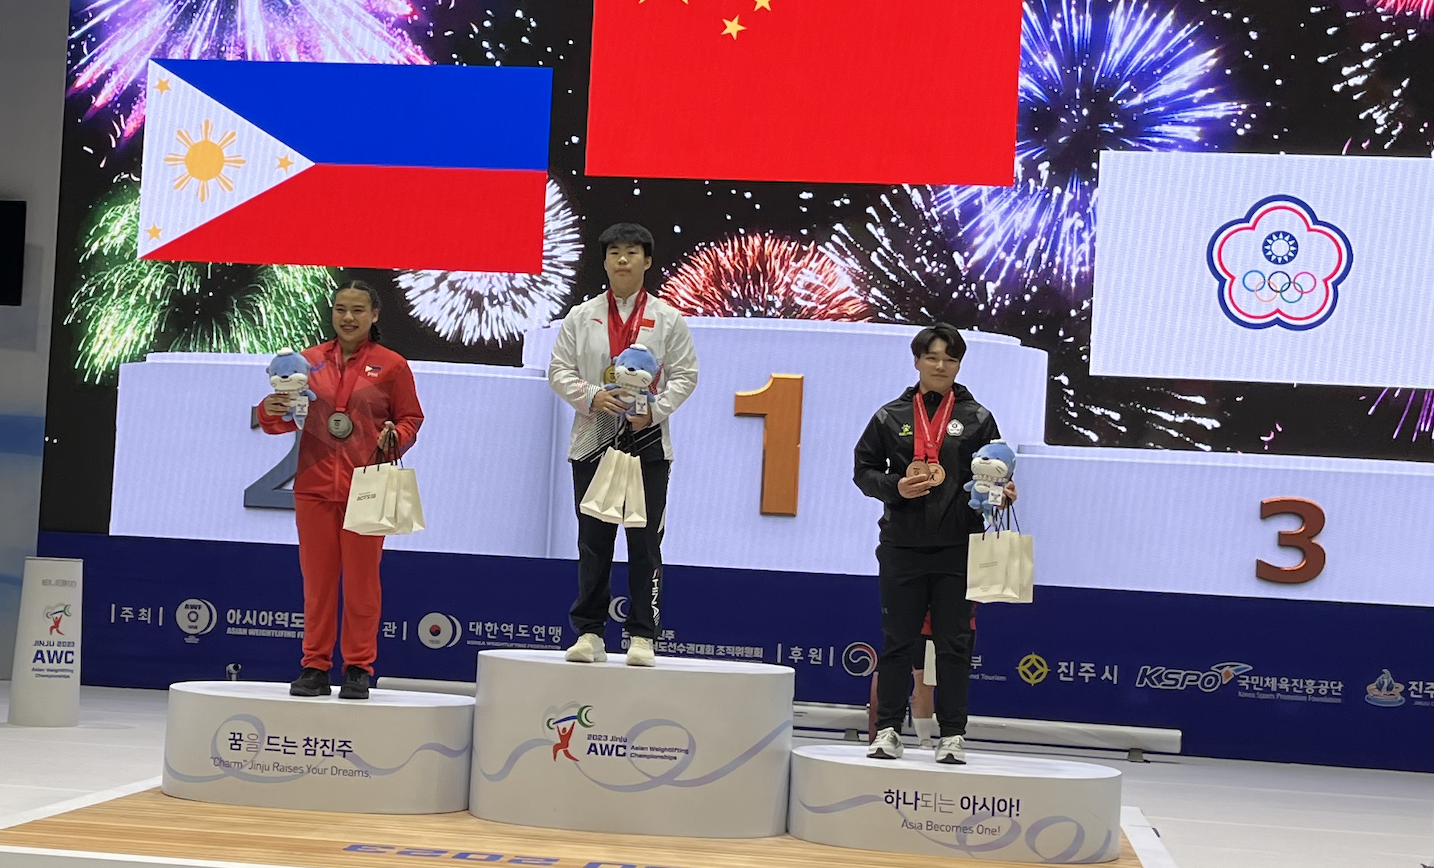 The podium for the women's 71 kilograms category at the Asian Weightlifting Championships in Jinju ©Brian Oliver